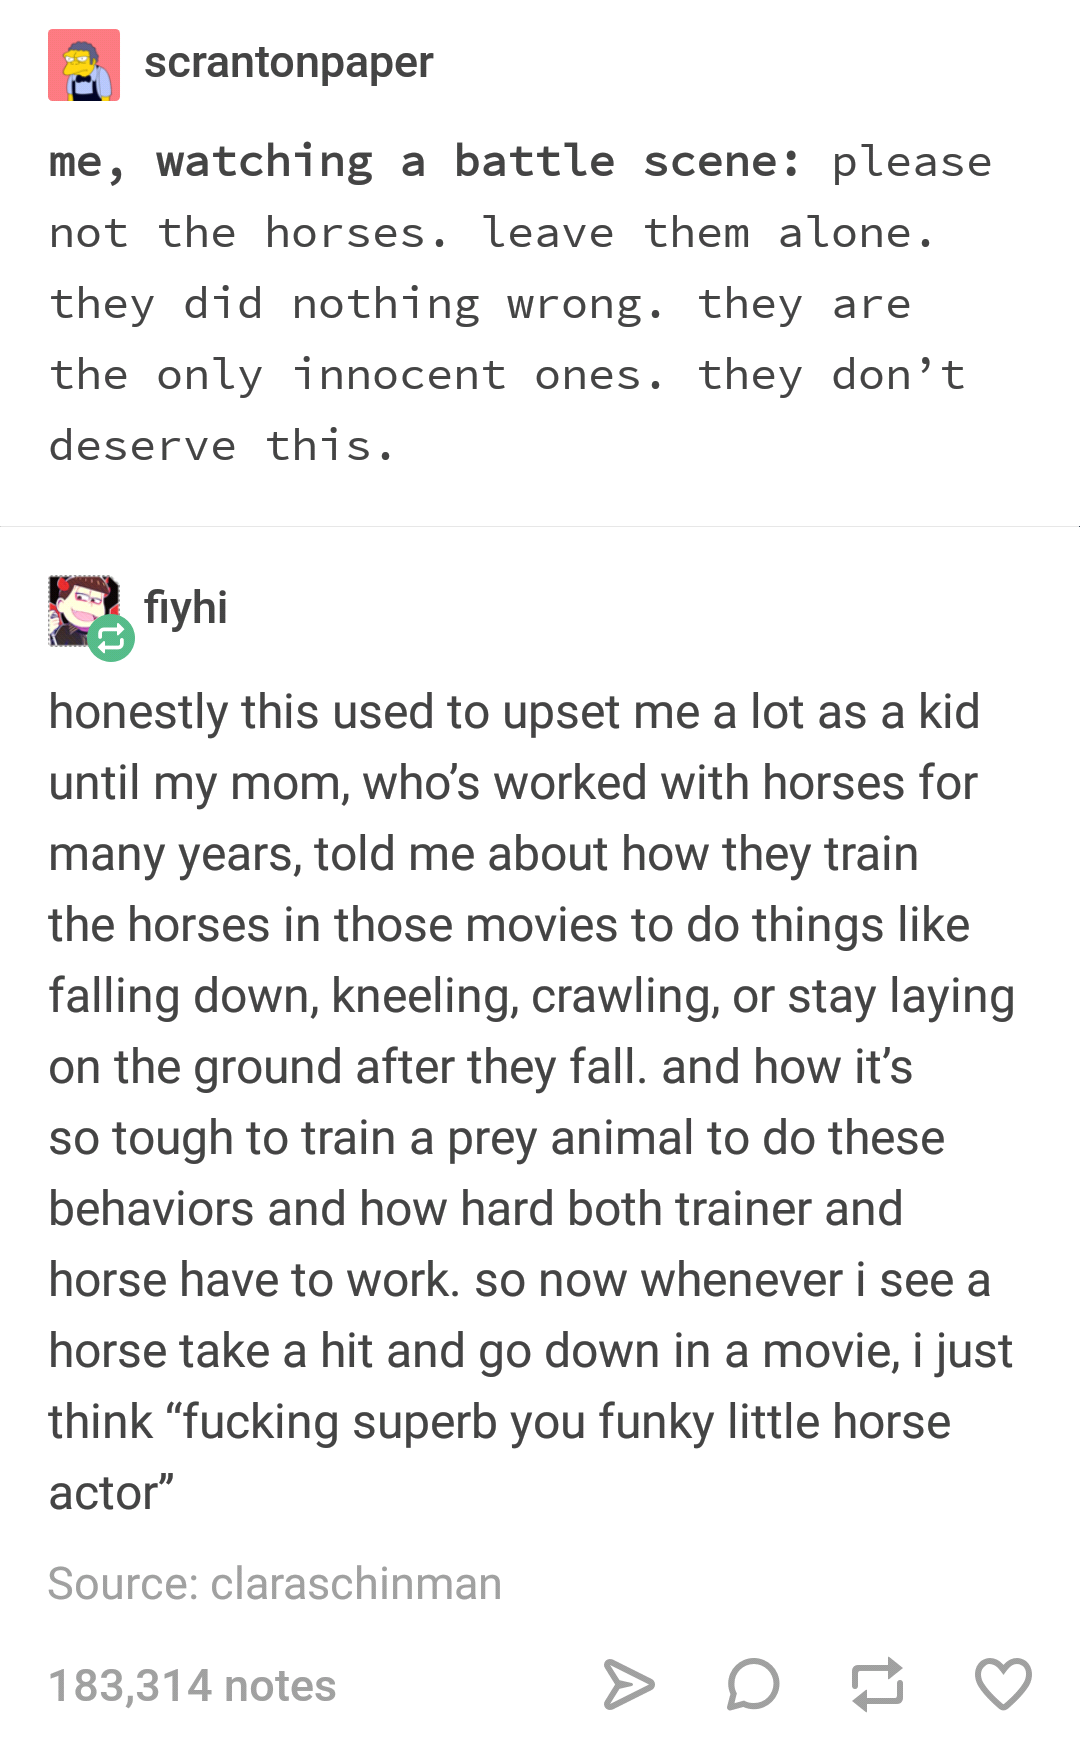 Horses in movies